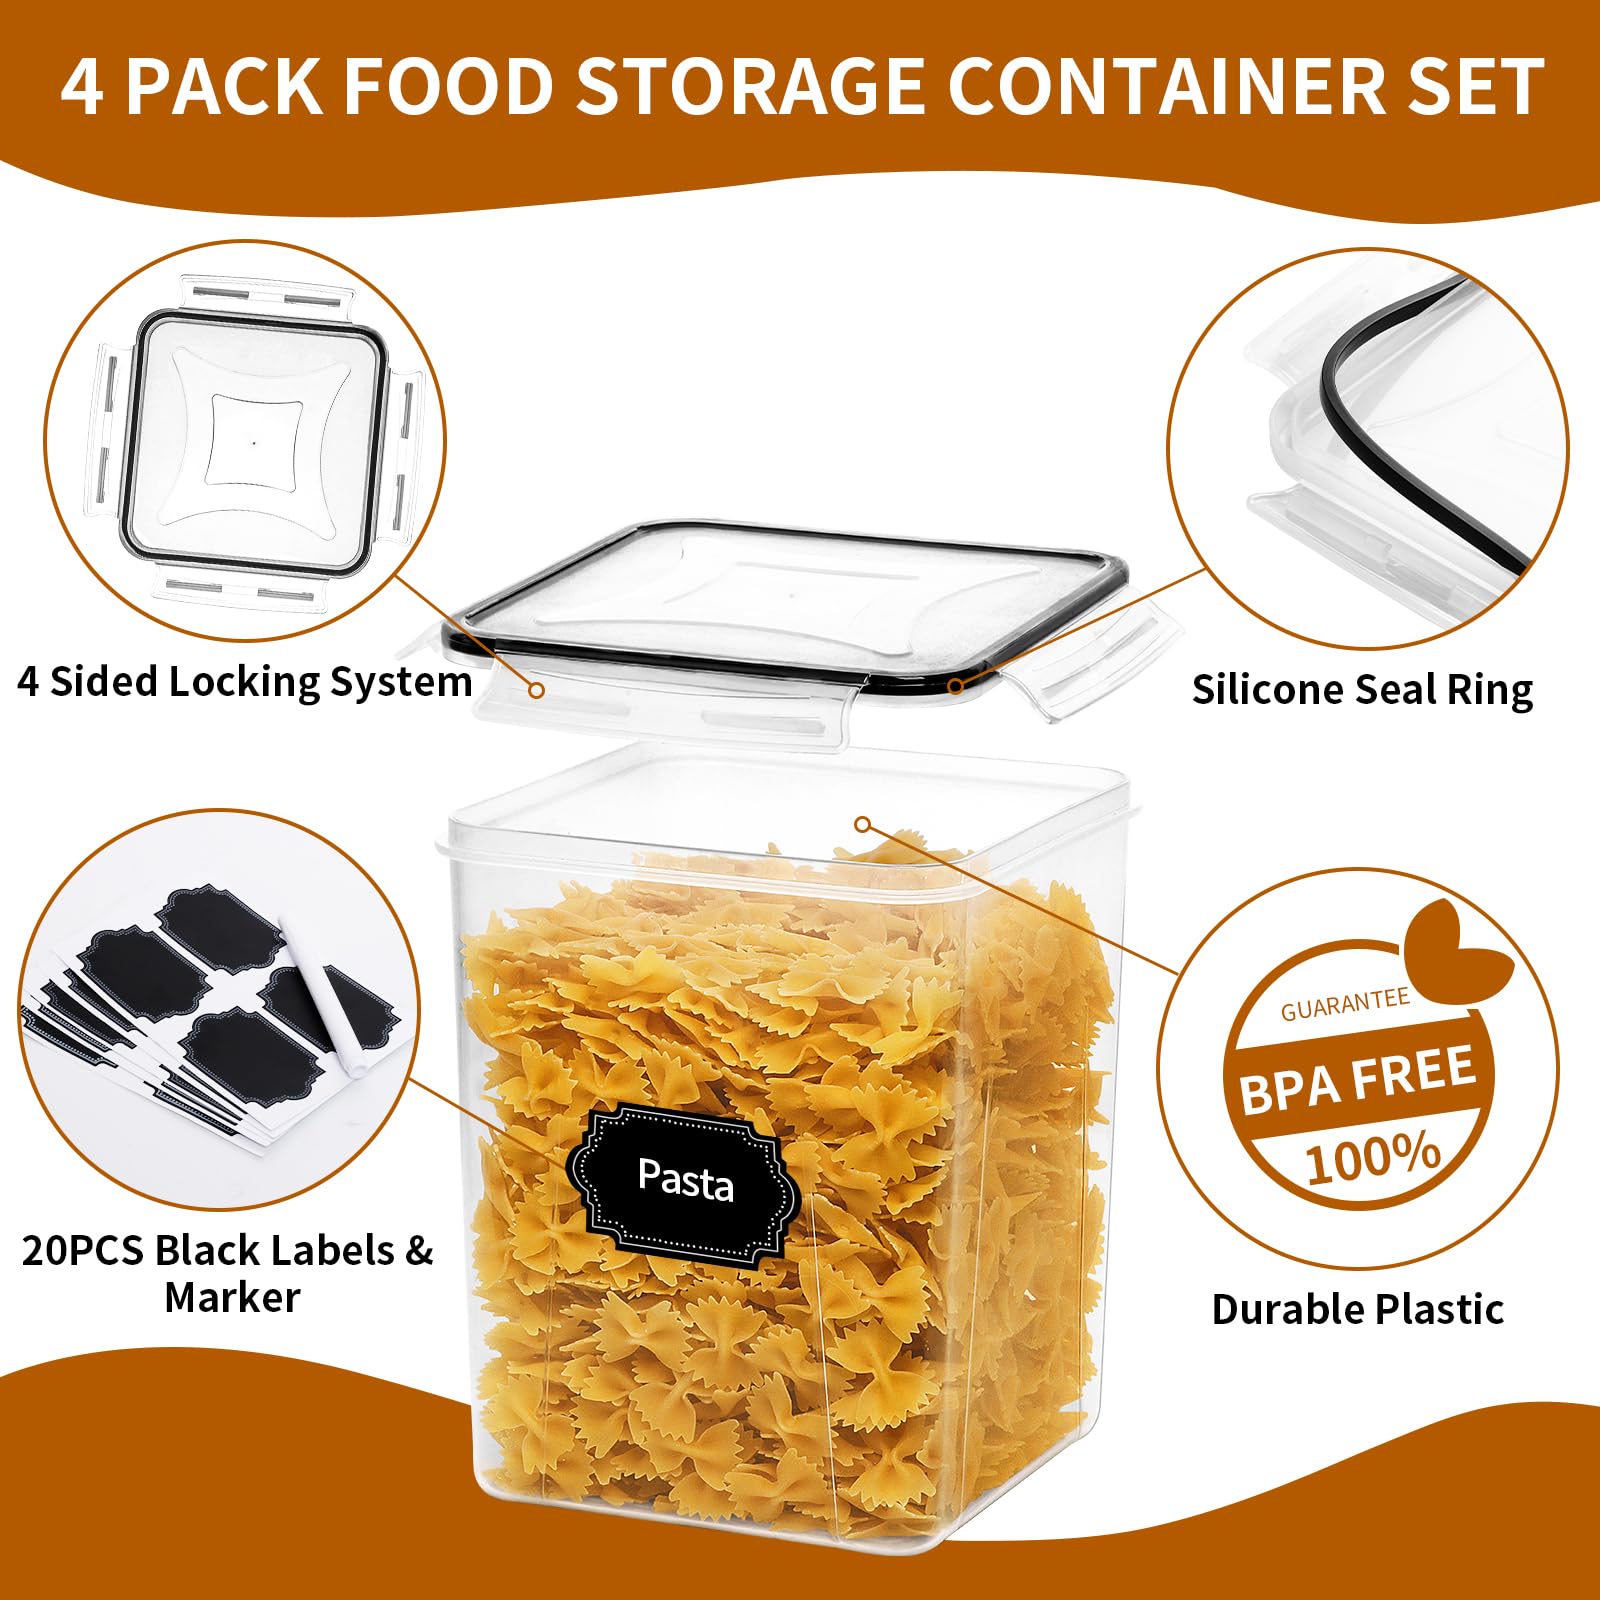 HKJ Chef 4 Pack Large Airtight Food Storage Containers with Lids (5.2L / 176oz), BPA Free Plastic Kitchen and Pantry Organization Contianers for Cereal Flour and Sugar Storage - Labels & Marker